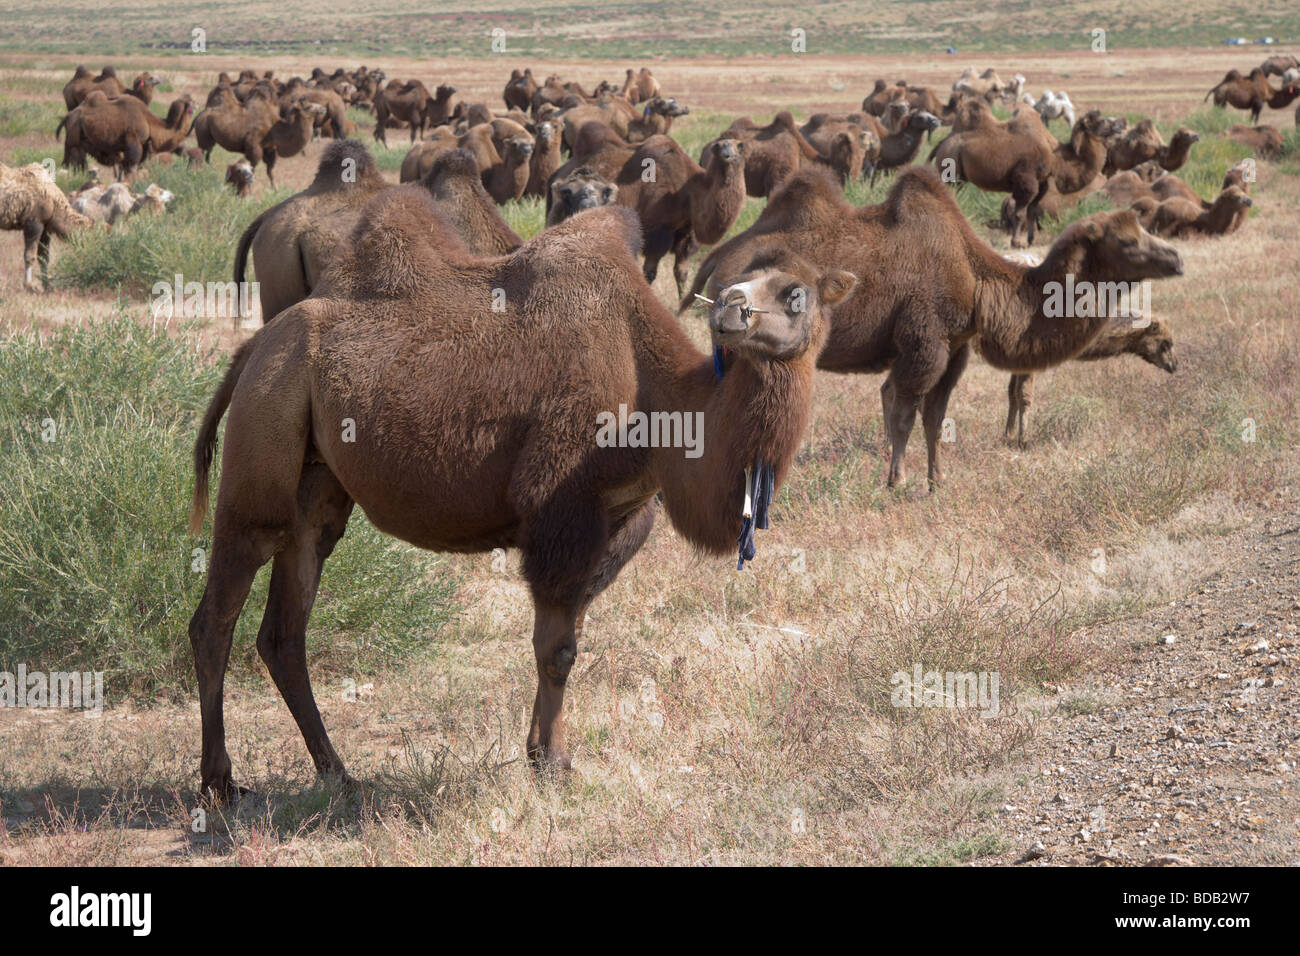 Herd of two humped camels on the steppe, north central Mongolia Stock Photo